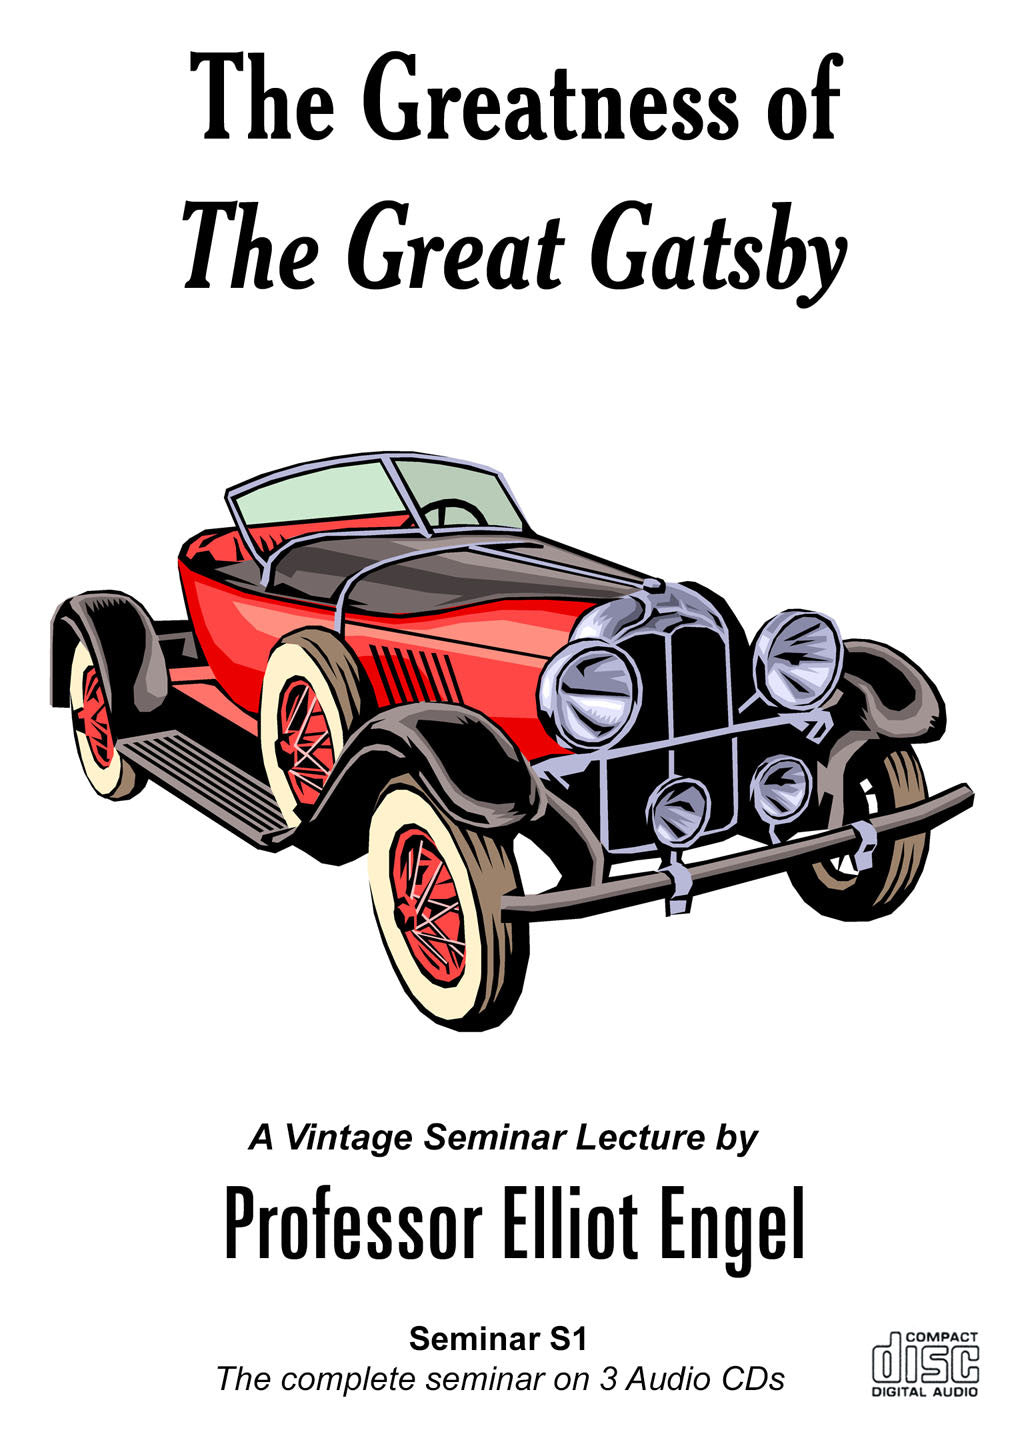 Seminar 01: The Greatness of The Great Gatsby